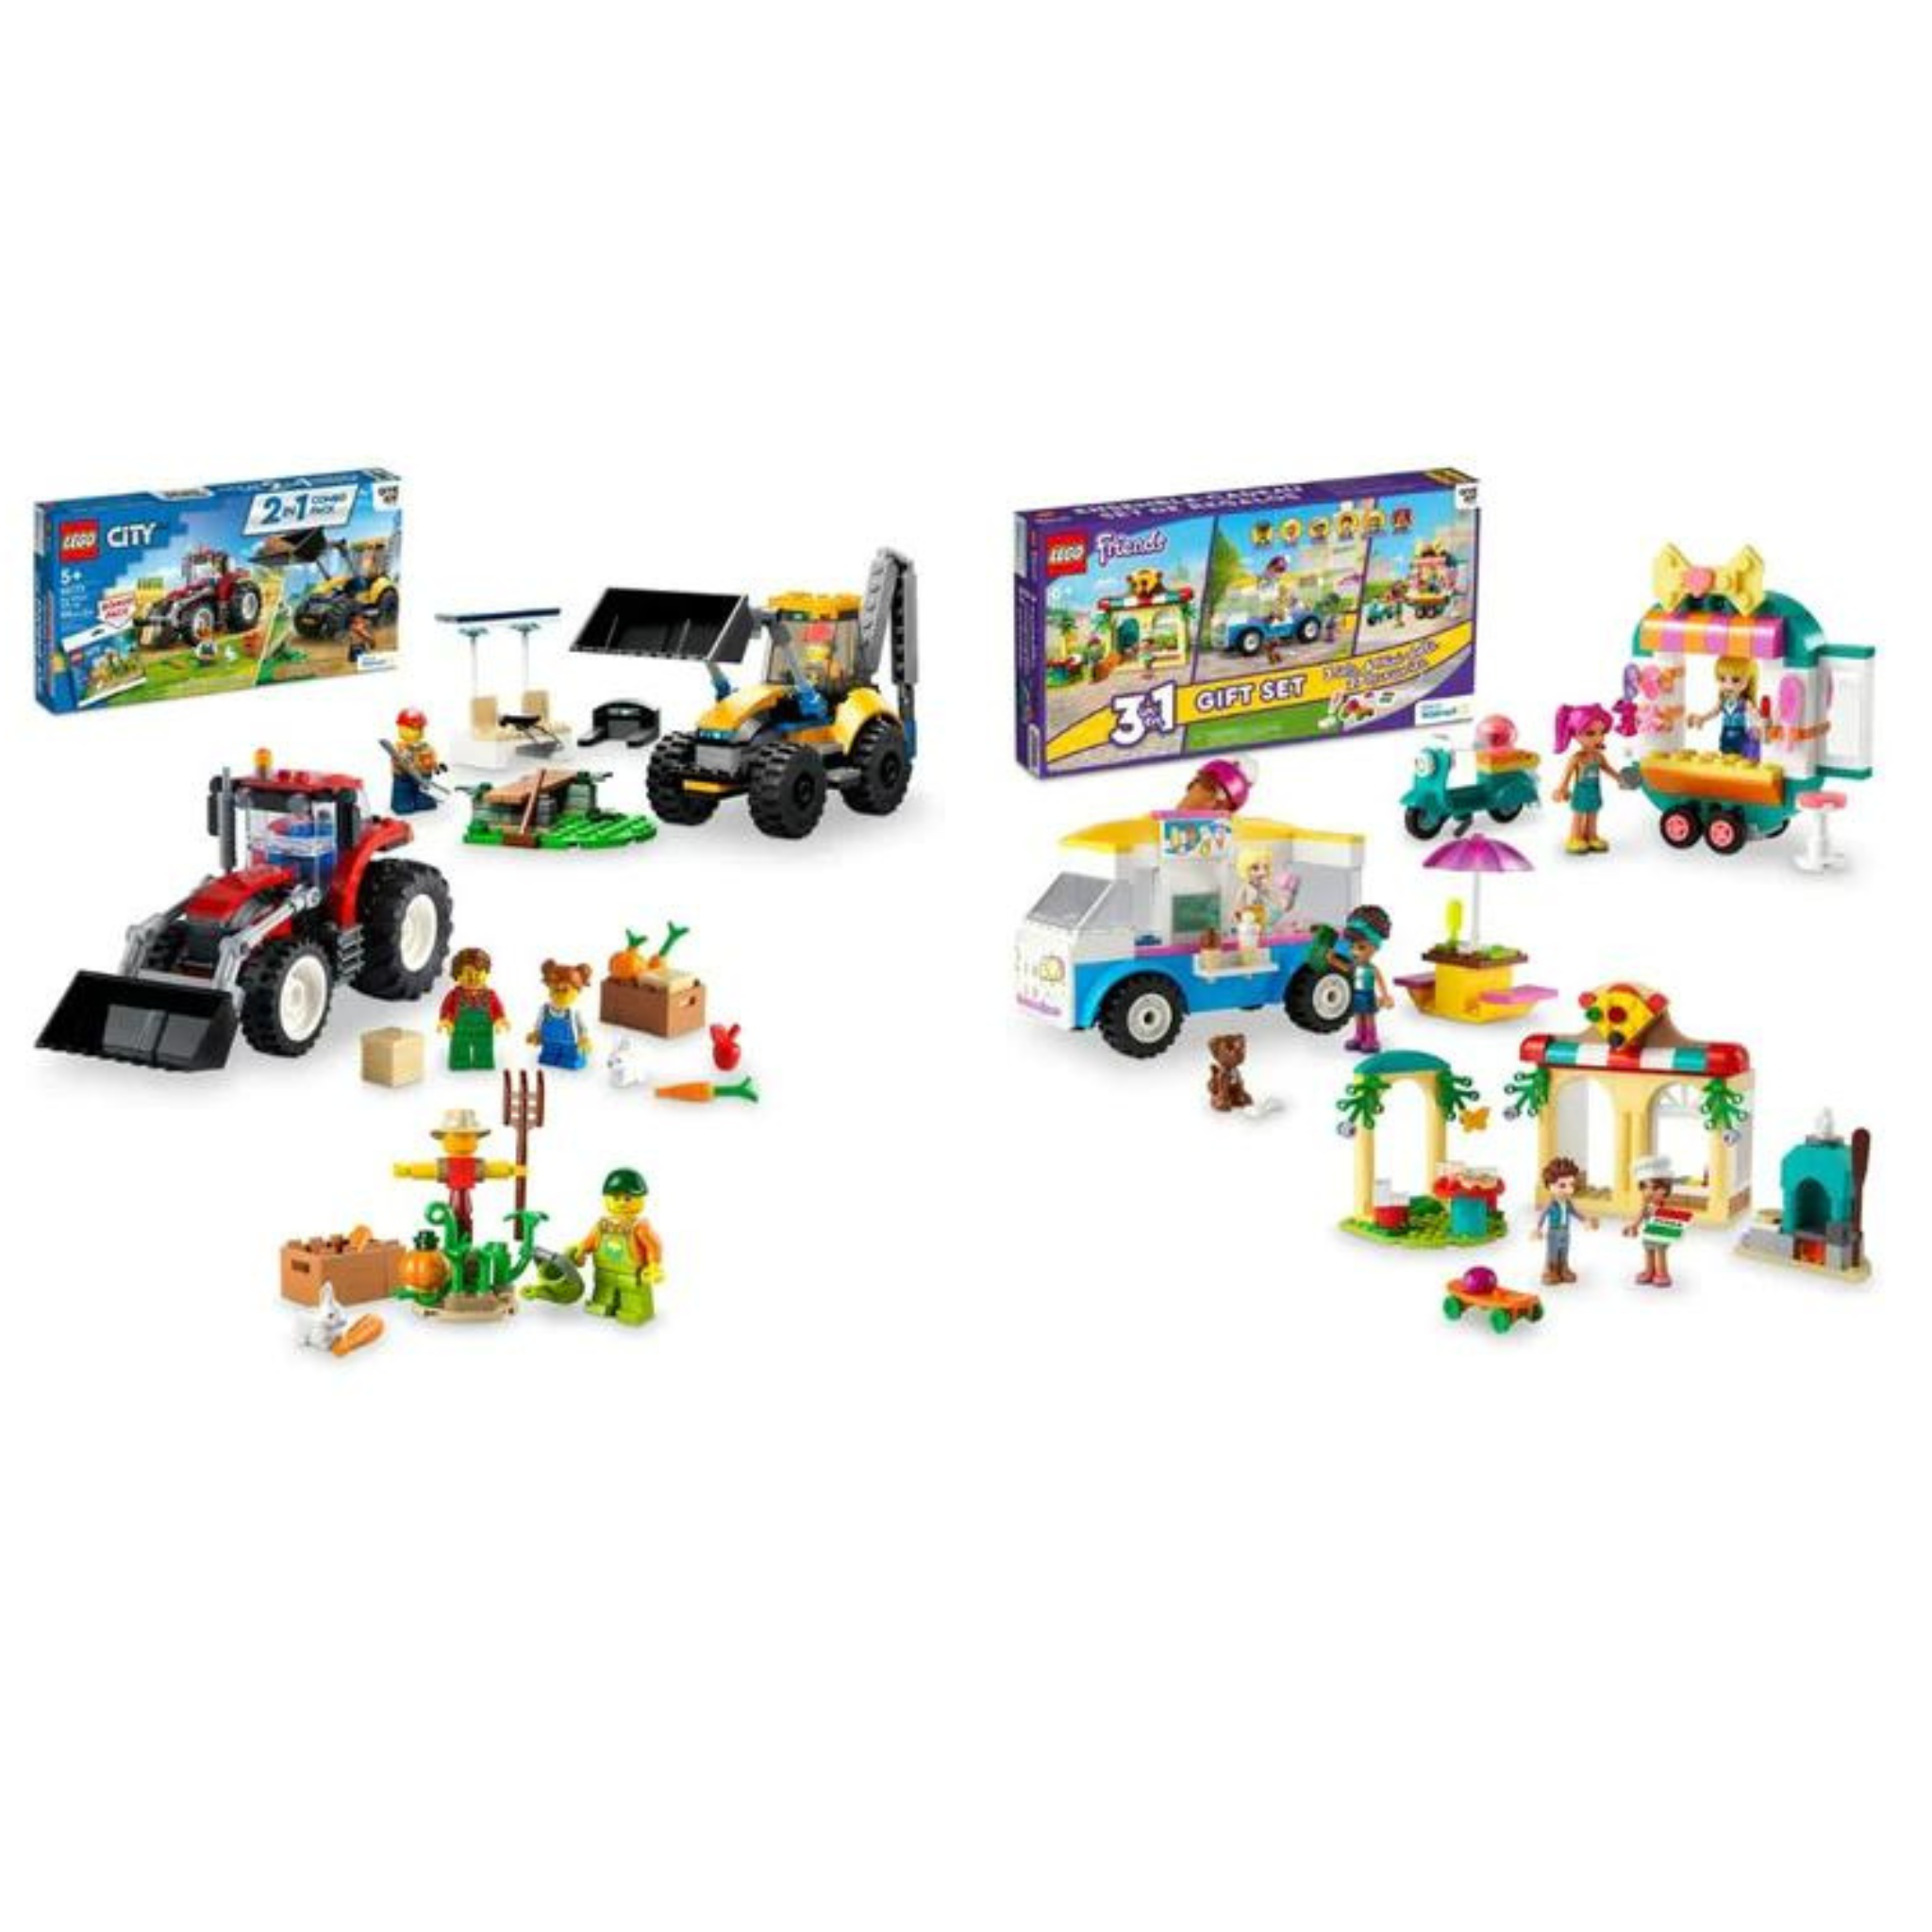 LEGO Play Day Gift Set Or Lego 2 in 1 Tractor and Construction Digger Building Toy Set